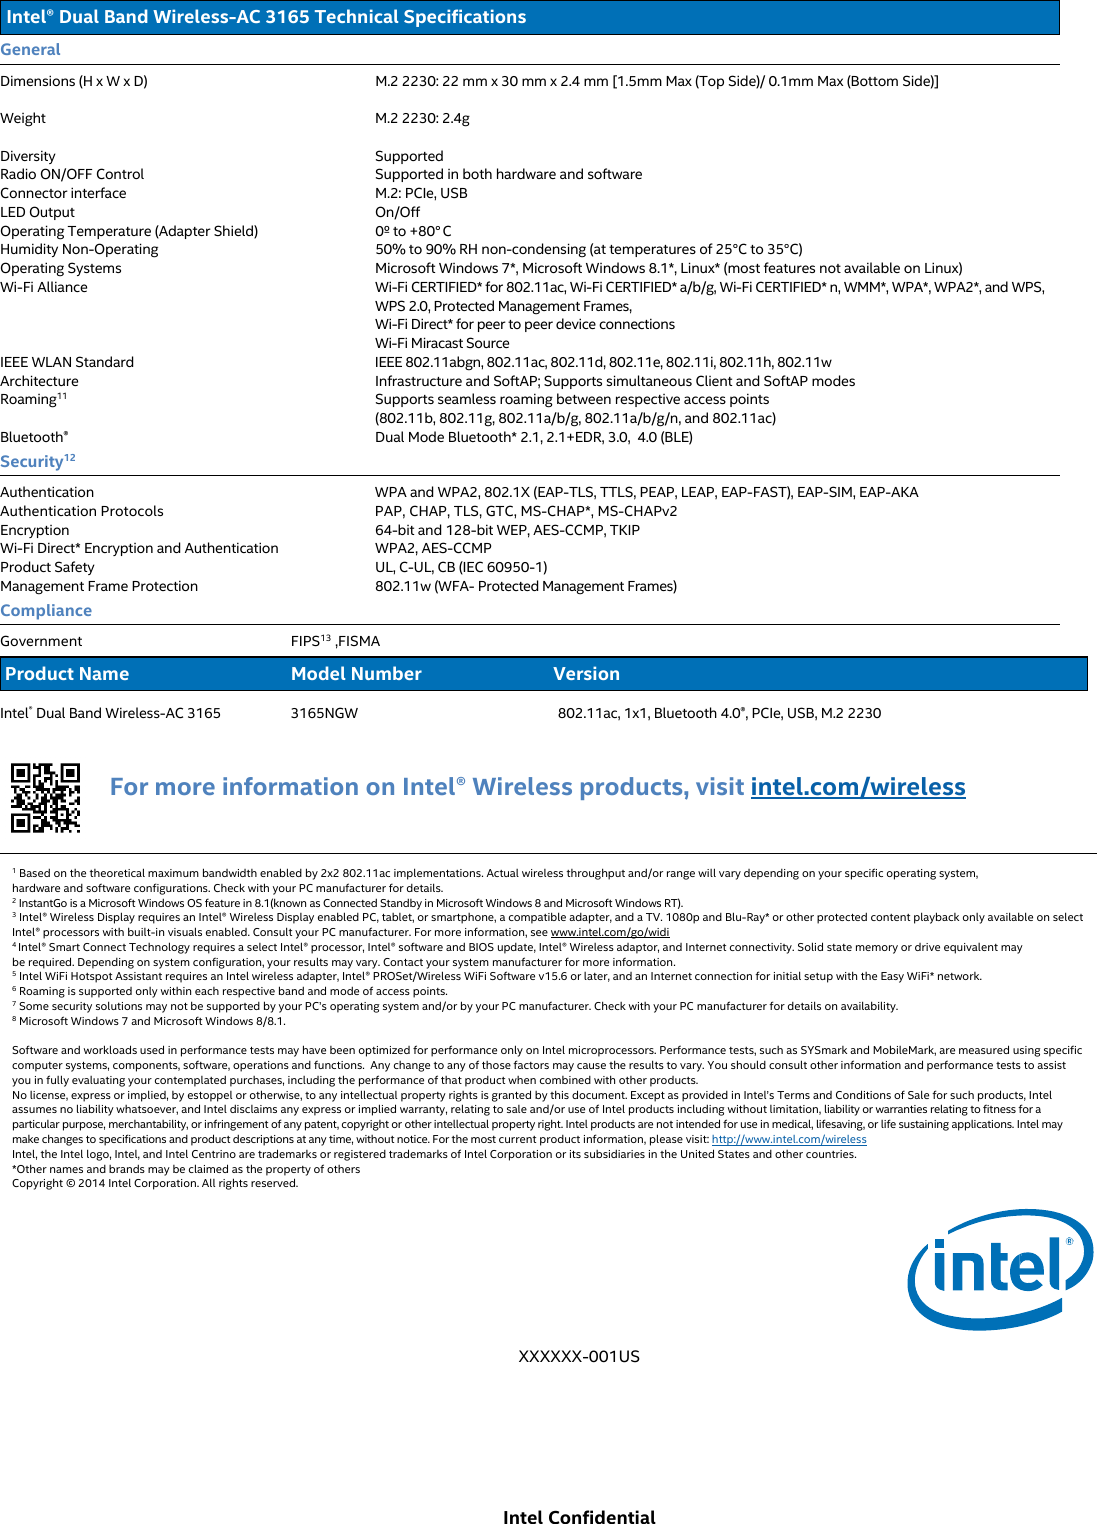 Intel Confidential  Intel® Dual Band Wireless-AC 3165 Technical Specifications General Dimensions (H x W x D)  M.2 2230: 22 mm x 30 mm x 2.4 mm [1.5mm Max (Top Side)/ 0.1mm Max (Bottom Side)]  Weight  M.2 2230: 2.4g  Diversity Supported Radio ON/OFF Control  Supported in both hardware and software Connector interface  M.2: PCIe, USB LED Output  On/Off Operating Temperature (Adapter Shield)  0º to +80° C  Humidity Non-Operating  50% to 90% RH non-condensing (at temperatures of 25°C to 35°C) Operating Systems  Microsoft Windows 7*, Microsoft Windows 8.1*, Linux* (most features not available on Linux) Wi-Fi Alliance  Wi-Fi CERTIFIED* for 802.11ac, Wi-Fi CERTIFIED* a/b/g, Wi-Fi CERTIFIED* n, WMM*, WPA*, WPA2*, and WPS, WPS 2.0, Protected Management Frames, Wi-Fi Direct* for peer to peer device connections Wi-Fi Miracast Source  IEEE WLAN Standard  IEEE 802.11abgn, 802.11ac, 802.11d, 802.11e, 802.11i, 802.11h, 802.11w Architecture  Infrastructure and SoftAP; Supports simultaneous Client and SoftAP modes Roaming11  Supports seamless roaming between respective access points (802.11b, 802.11g, 802.11a/b/g, 802.11a/b/g/n, and 802.11ac) Bluetooth®  Dual Mode Bluetooth* 2.1, 2.1+EDR, 3.0,  4.0 (BLE) Security12 Authentication  WPA and WPA2, 802.1X (EAP-TLS, TTLS, PEAP, LEAP, EAP-FAST), EAP-SIM, EAP-AKA Authentication Protocols  PAP, CHAP, TLS, GTC, MS-CHAP*, MS-CHAPv2 Encryption  64-bit and 128-bit WEP, AES-CCMP, TKIP Wi-Fi Direct* Encryption and Authentication WPA2, AES-CCMP Product Safety Management Frame Protection UL, C-UL, CB (IEC 60950-1) 802.11w (WFA- Protected Management Frames) Compliance Government FIPS13 ,FISMA  Product Name  Model Number  Version Intel® Dual Band Wireless-AC 3165  3165NGW  802.11ac, 1x1, Bluetooth 4.0®, PCIe, USB, M.2 2230 For more information on Intel® Wireless products, visit intel.com/wireless 1 Based on the theoretical maximum bandwidth enabled by 2x2 802.11ac implementations. Actual wireless throughput and/or range will vary depending on your specific operating system, hardware and software configurations. Check with your PC manufacturer for details. 2 InstantGo is a Microsoft Windows OS feature in 8.1(known as Connected Standby in Microsoft Windows 8 and Microsoft Windows RT). 3 Intel® Wireless Display requires an Intel® Wireless Display enabled PC, tablet, or smartphone, a compatible adapter, and a TV. 1080p and Blu-Ray* or other protected content playback only available on select Intel® processors with built-in visuals enabled. Consult your PC manufacturer. For more information, see www.intel.com/go/widi 4 Intel® Smart Connect Technology requires a select Intel® processor, Intel® software and BIOS update, Intel® Wireless adaptor, and Internet connectivity. Solid state memory or drive equivalent may be required. Depending on system configuration, your results may vary. Contact your system manufacturer for more information. 5 Intel WiFi Hotspot Assistant requires an Intel wireless adapter, Intel® PROSet/Wireless WiFi Software v15.6 or later, and an Internet connection for initial setup with the Easy WiFi* network. 6 Roaming is supported only within each respective band and mode of access points. 7 Some security solutions may not be supported by your PC’s operating system and/or by your PC manufacturer. Check with your PC manufacturer for details on availability. 8 Microsoft Windows 7 and Microsoft Windows 8/8.1.  Software and workloads used in performance tests may have been optimized for performance only on Intel microprocessors. Performance tests, such as SYSmark and MobileMark, are measured using specific computer systems, components, software, operations and functions.  Any change to any of those factors may cause the results to vary. You should consult other information and performance tests to assist you in fully evaluating your contemplated purchases, including the performance of that product when combined with other products. No license, express or implied, by estoppel or otherwise, to any intellectual property rights is granted by this document. Except as provided in Intel’s Terms and Conditions of Sale for such products, Intel assumes no liability whatsoever, and Intel disclaims any express or implied warranty, relating to sale and/or use of Intel products including without limitation, liability or warranties relating to fitness for a particular purpose, merchantability, or infringement of any patent, copyright or other intellectual property right. Intel products are not intended for use in medical, lifesaving, or life sustaining applications. Intel may make changes to specifications and product descriptions at any time, without notice. For the most current product information, please visit: http://www.intel.com/wireless Intel, the Intel logo, Intel, and Intel Centrino are trademarks or registered trademarks of Intel Corporation or its subsidiaries in the United States and other countries. *Other names and brands may be claimed as the property of others Copyright © 2014 Intel Corporation. All rights reserved.    XXXXXX-001US 